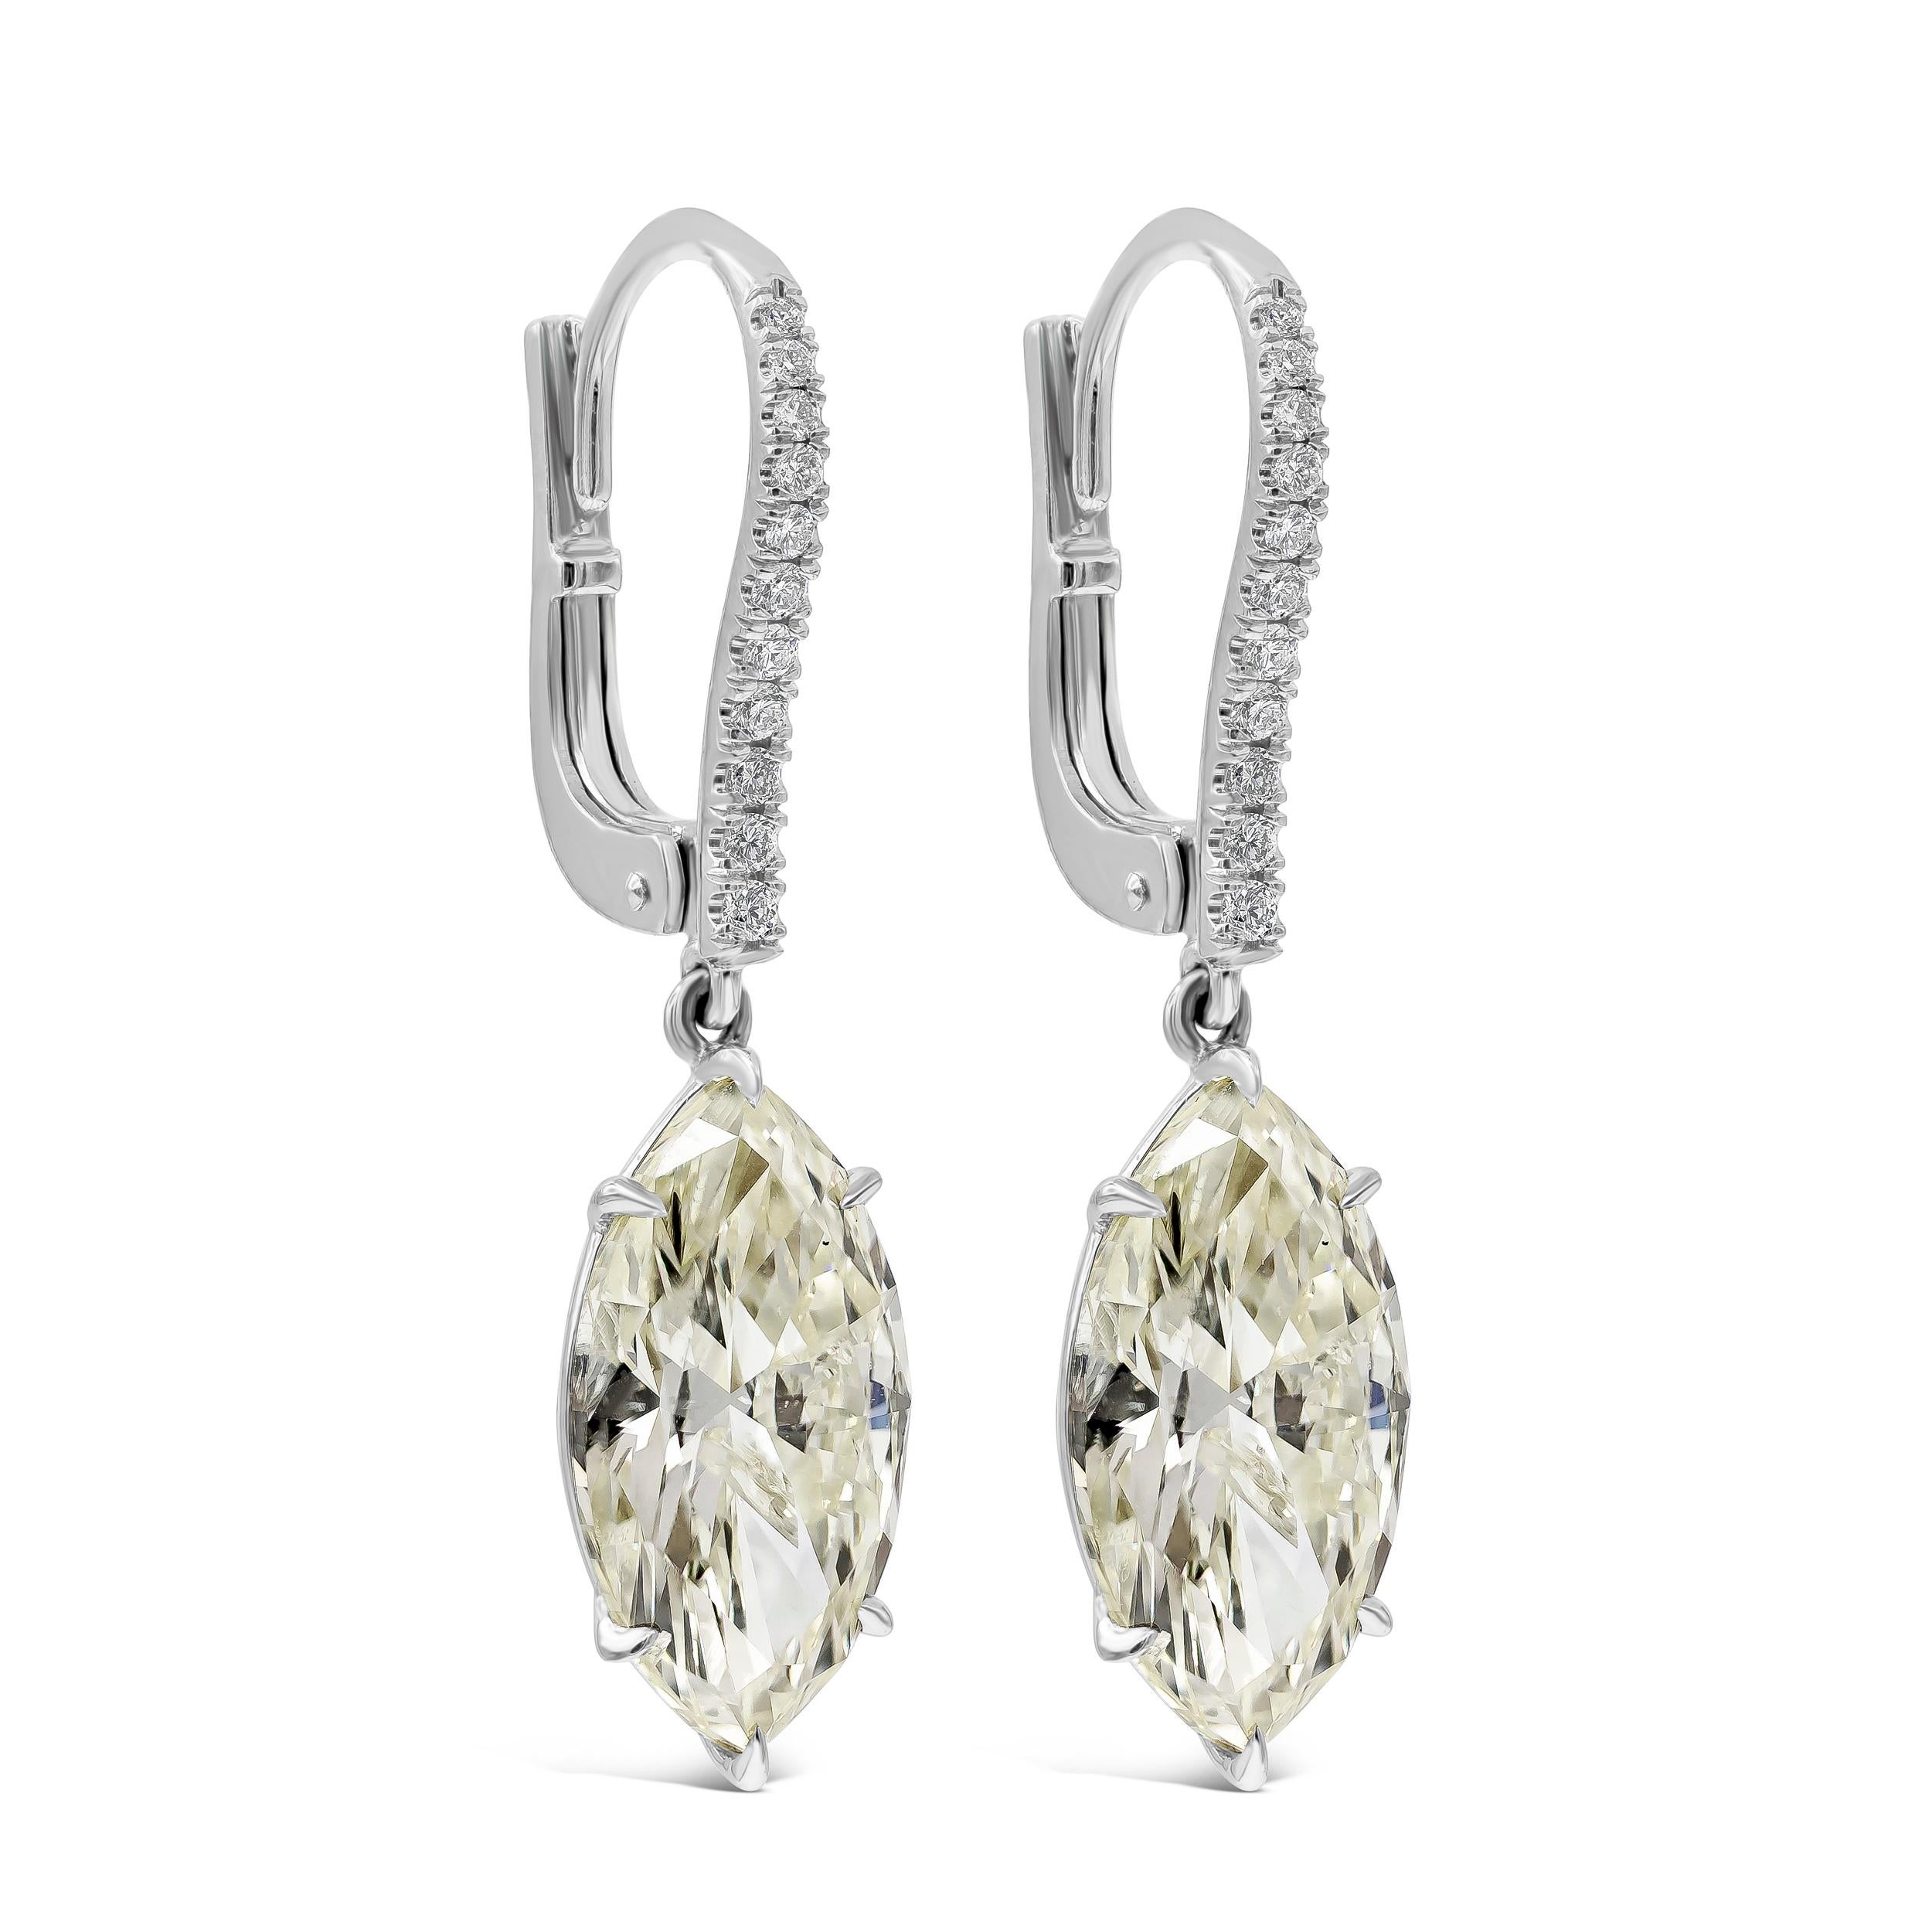 Each earring showcases a marquise cut diamond set in an elegant drop. Suspended on an accented lever-back made in 18 karat white gold. Marquise diamonds weigh 6.69 carats total and  are approximately L color, SI clarity. 

Roman Malakov is a custom